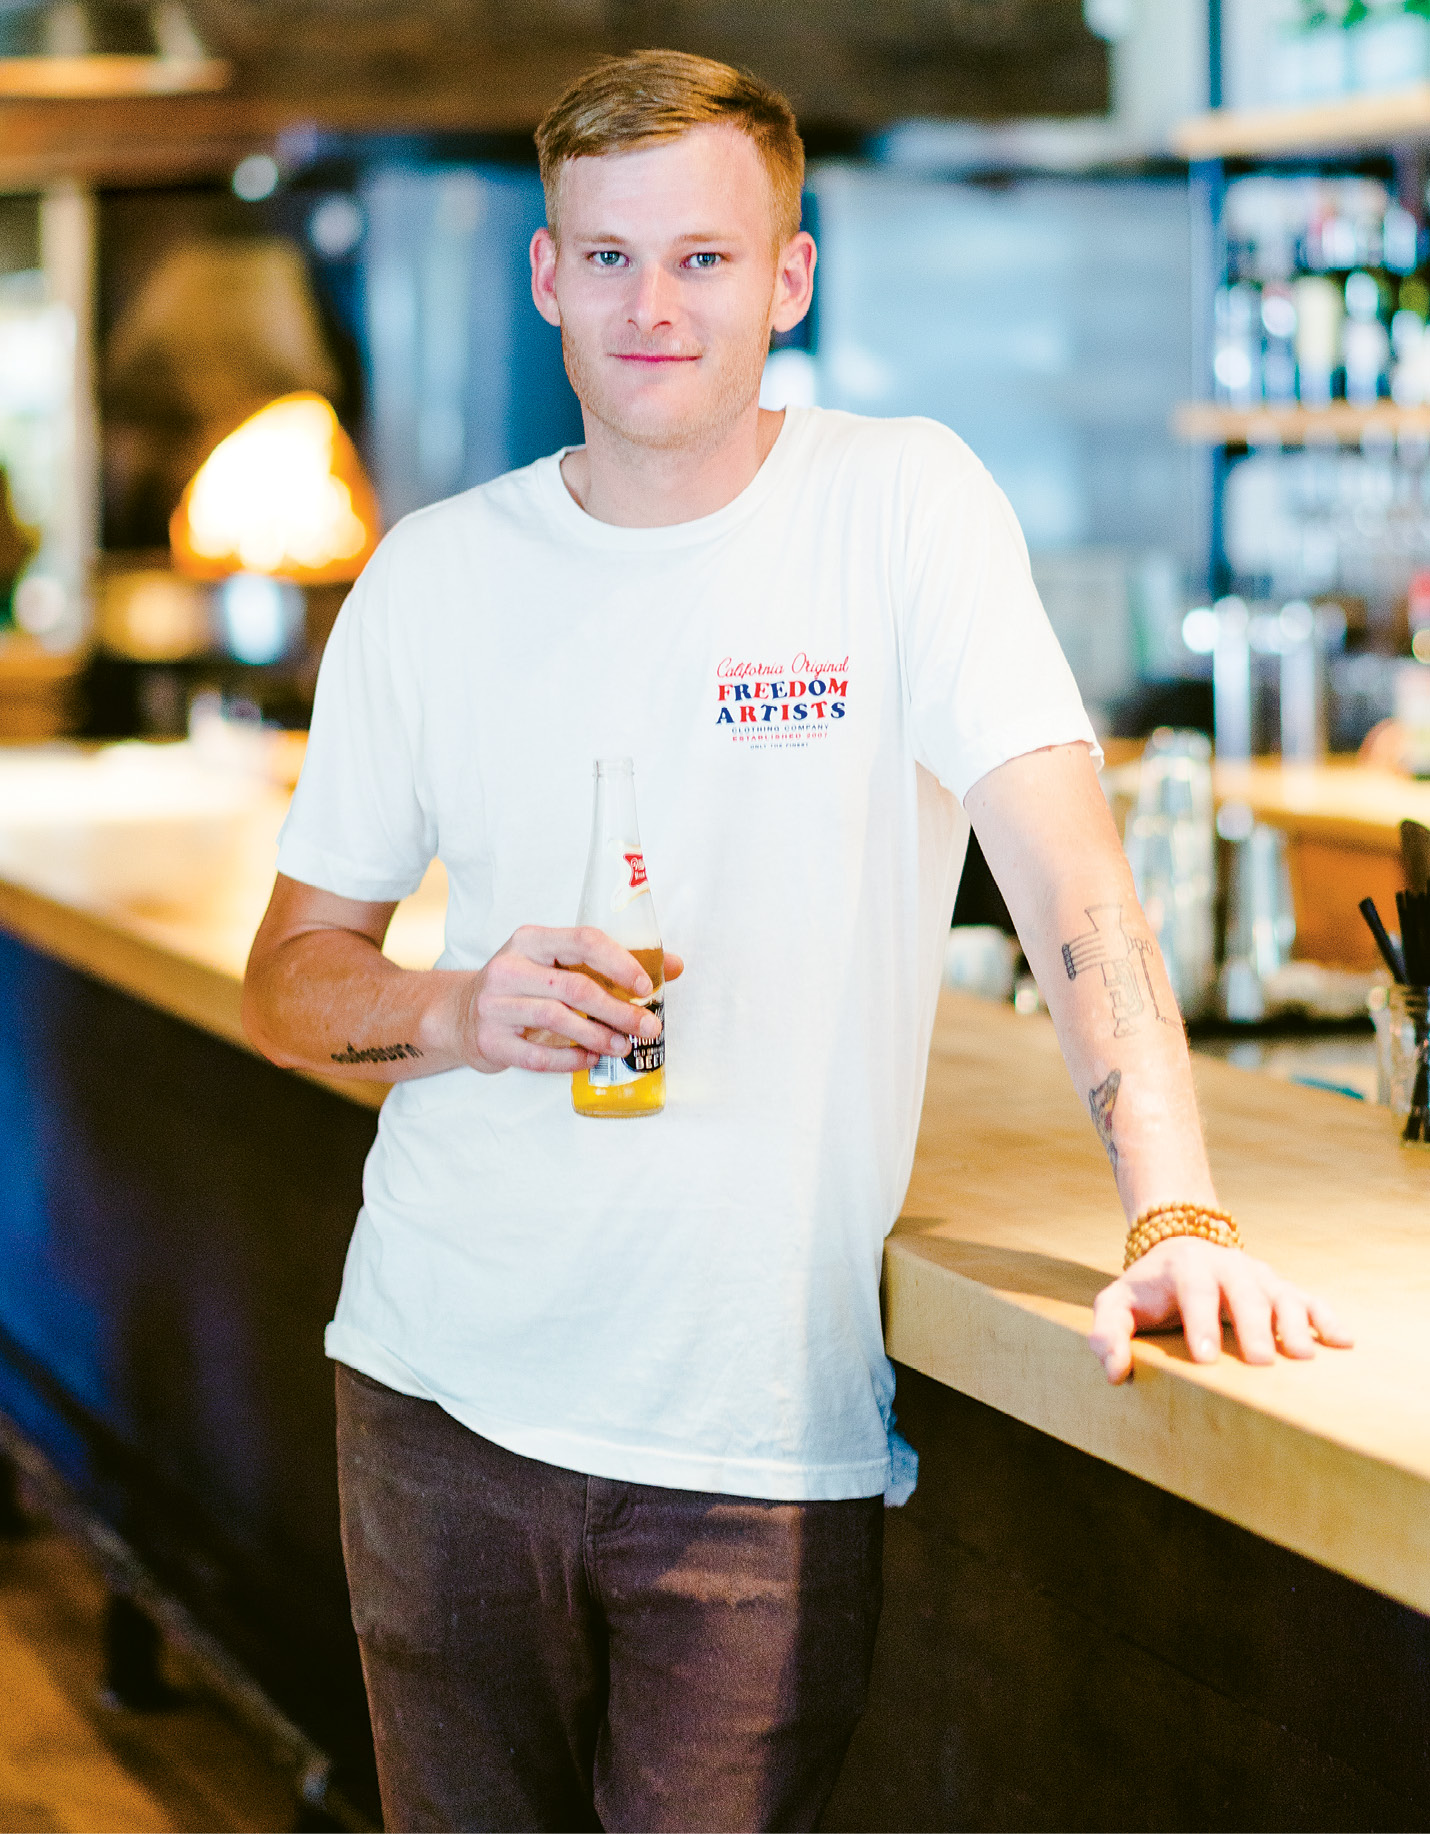 Getzewich by the bar at Indaco with his favorite beer; “I’ll make you spaghetti and meatballs—it’s not my job to say ‘no.’ But I like guiding diners to trying something they’ve never had.”